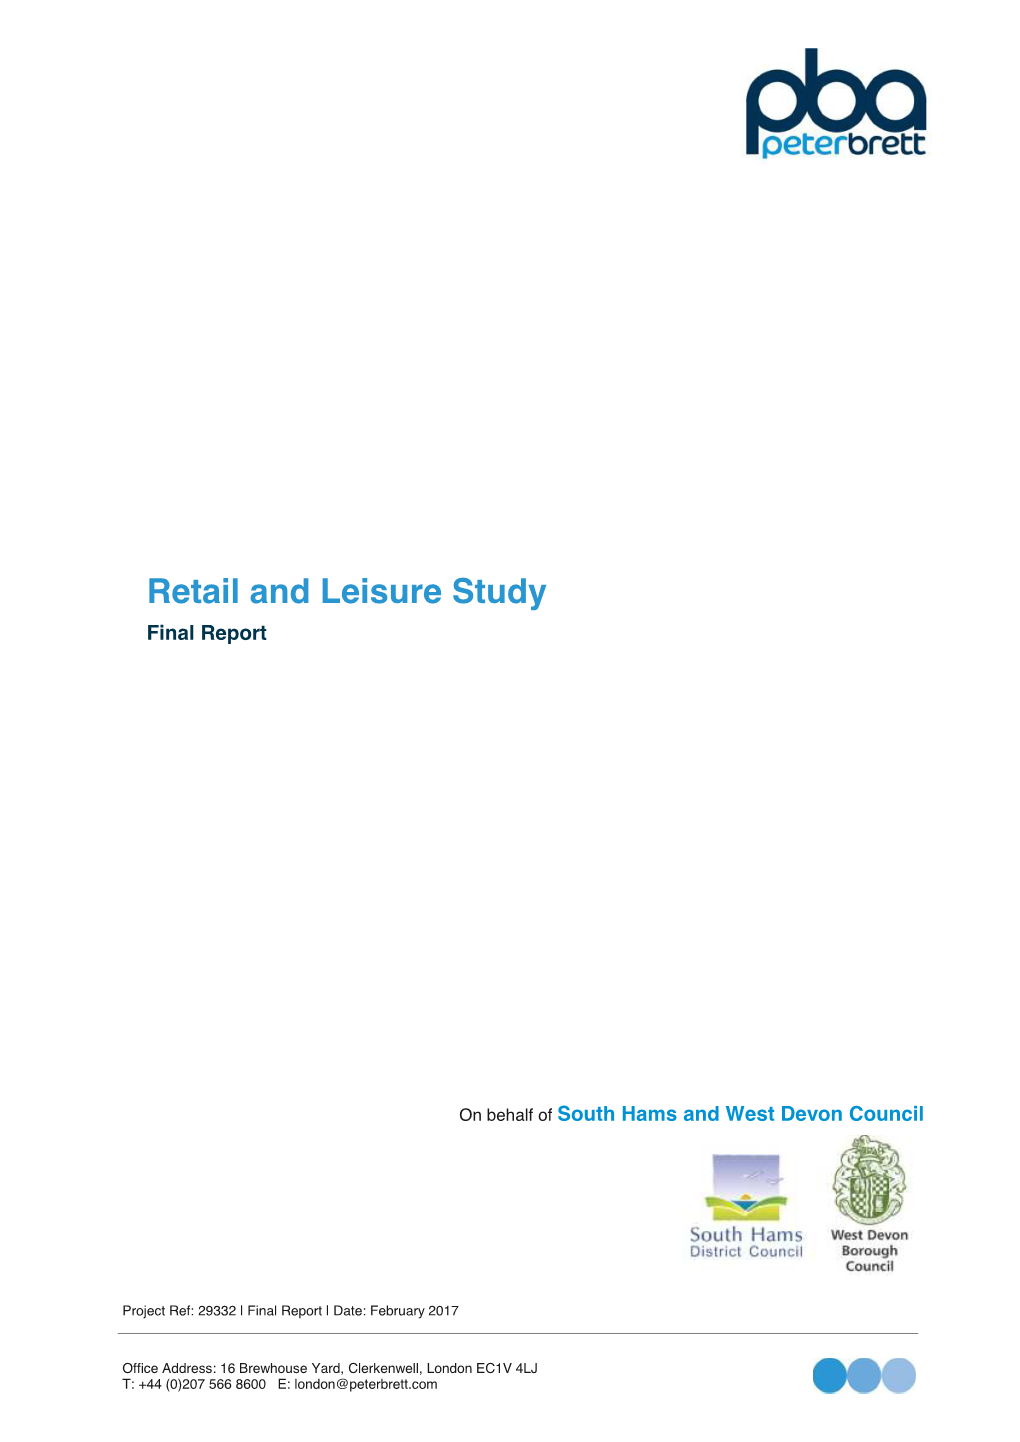 Retail and Leisure Study Final Report